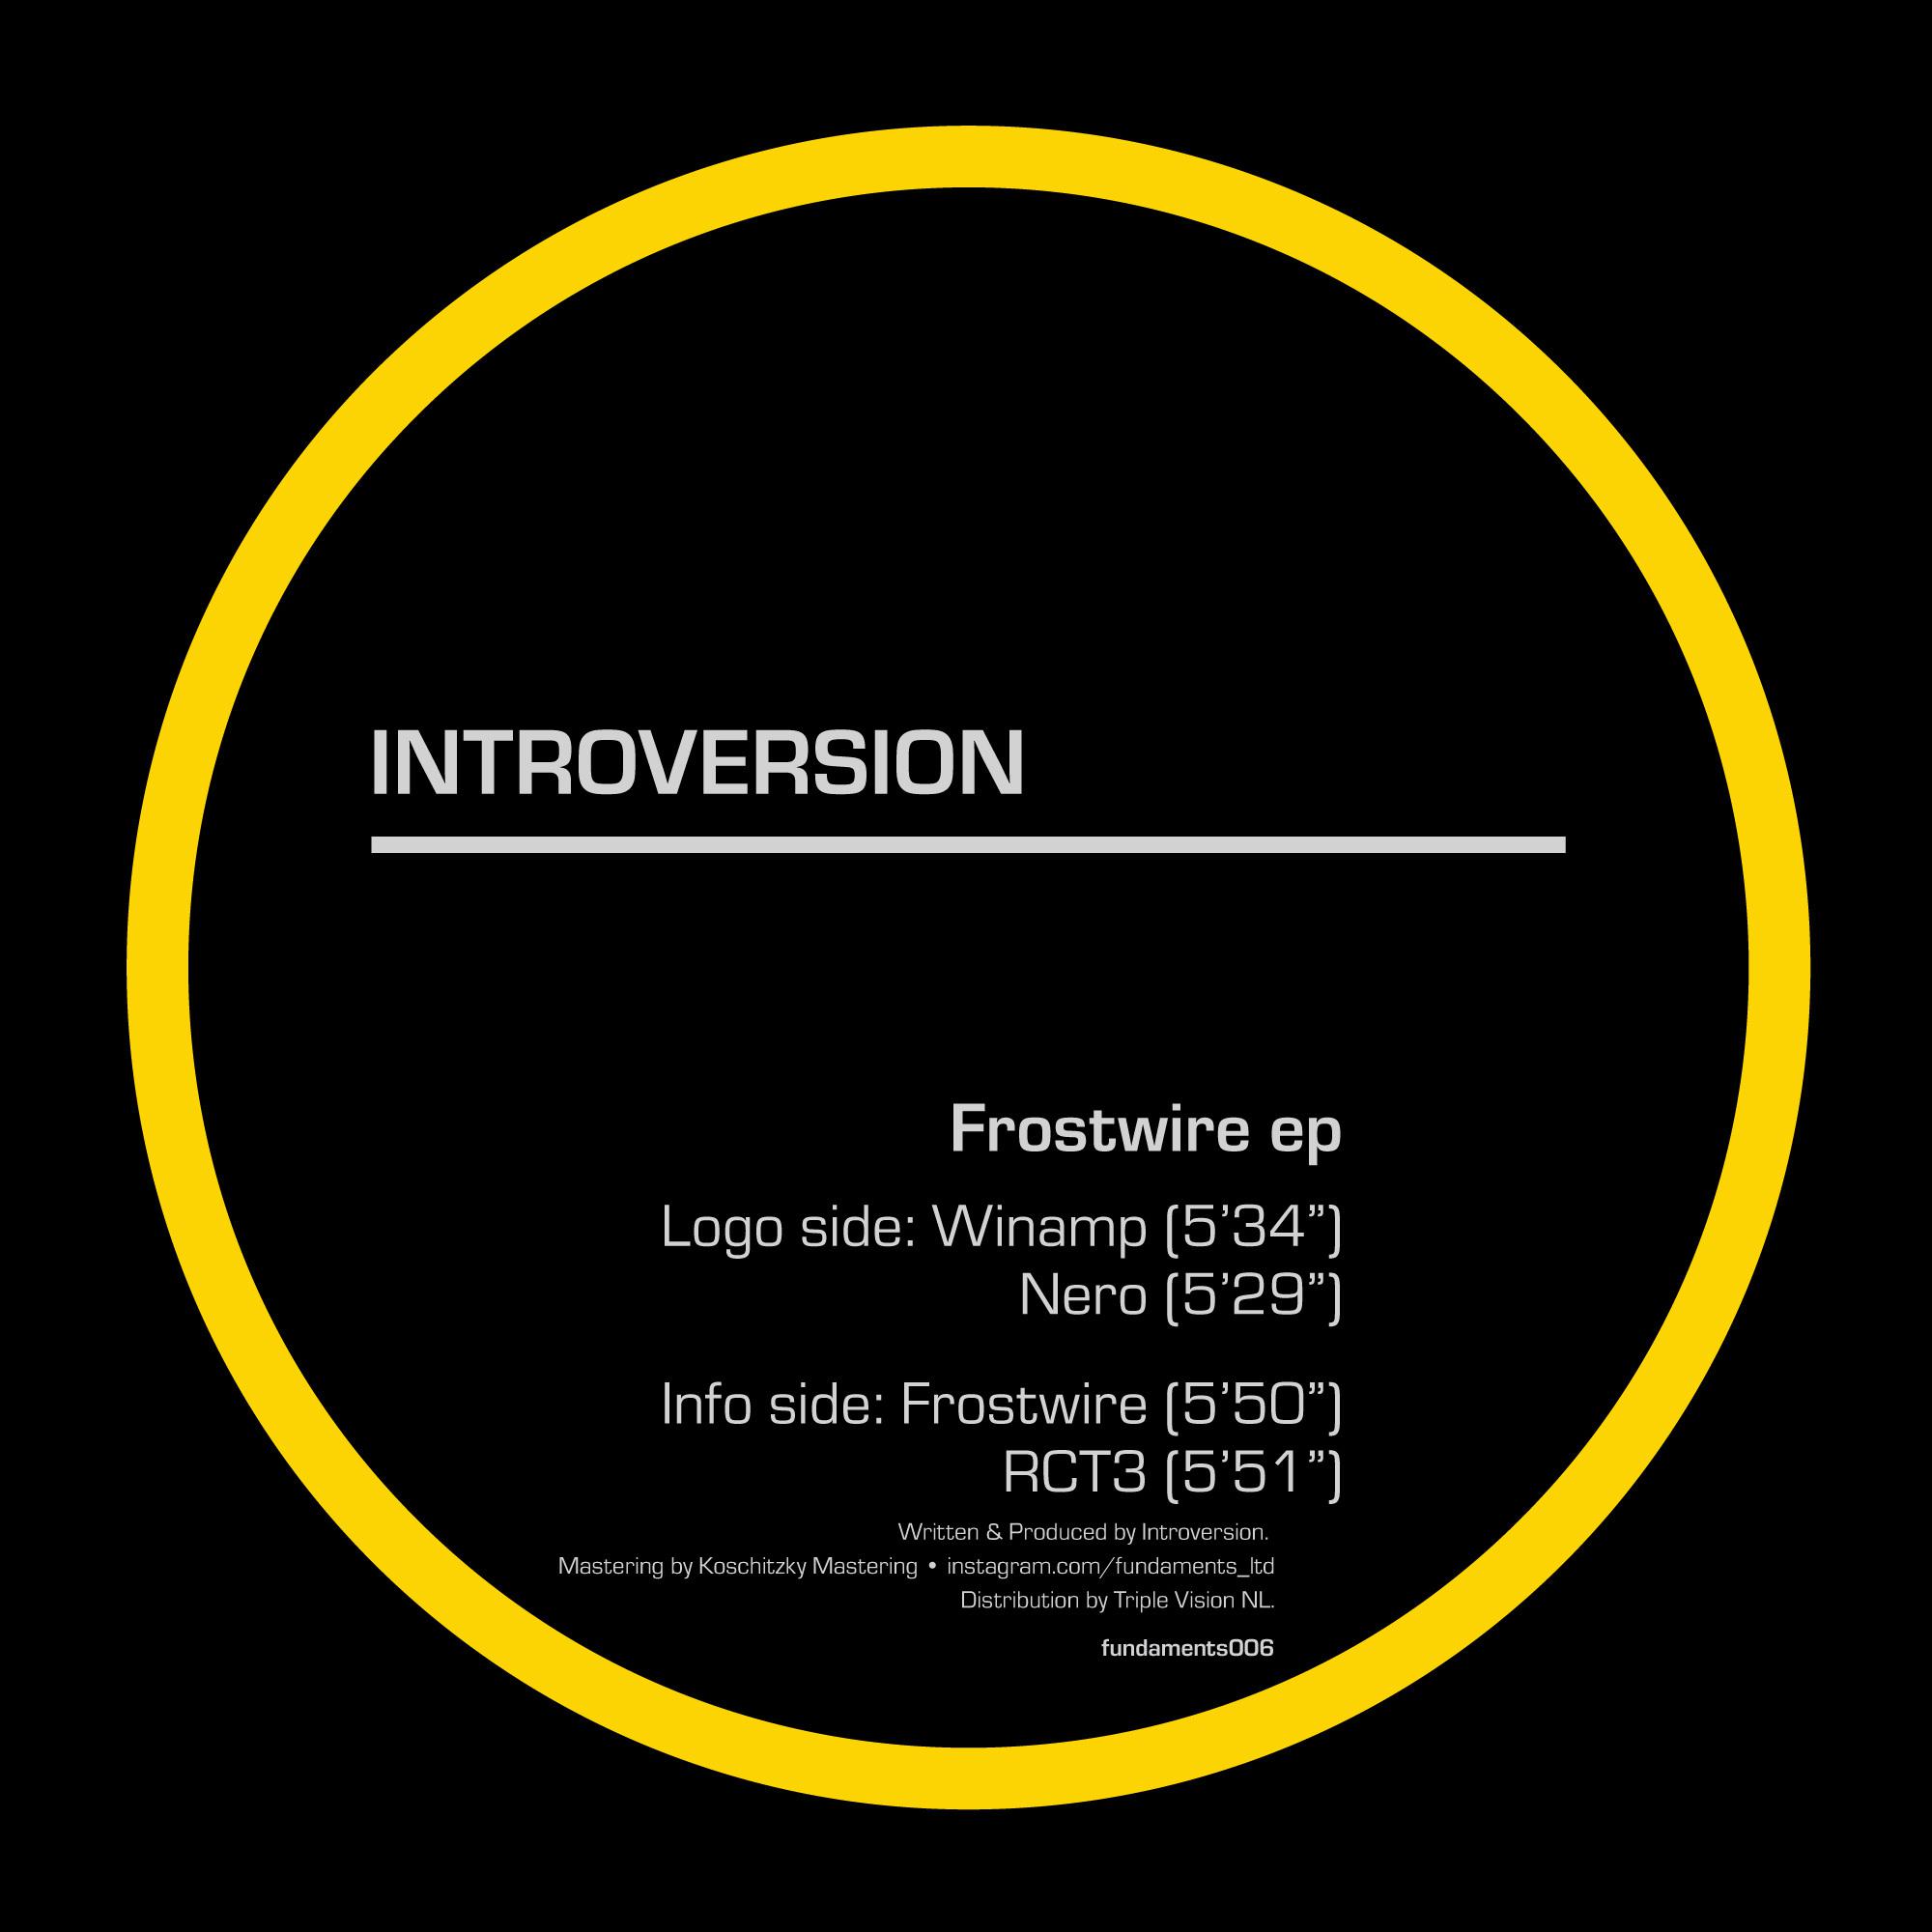 Introversion - Frostwire